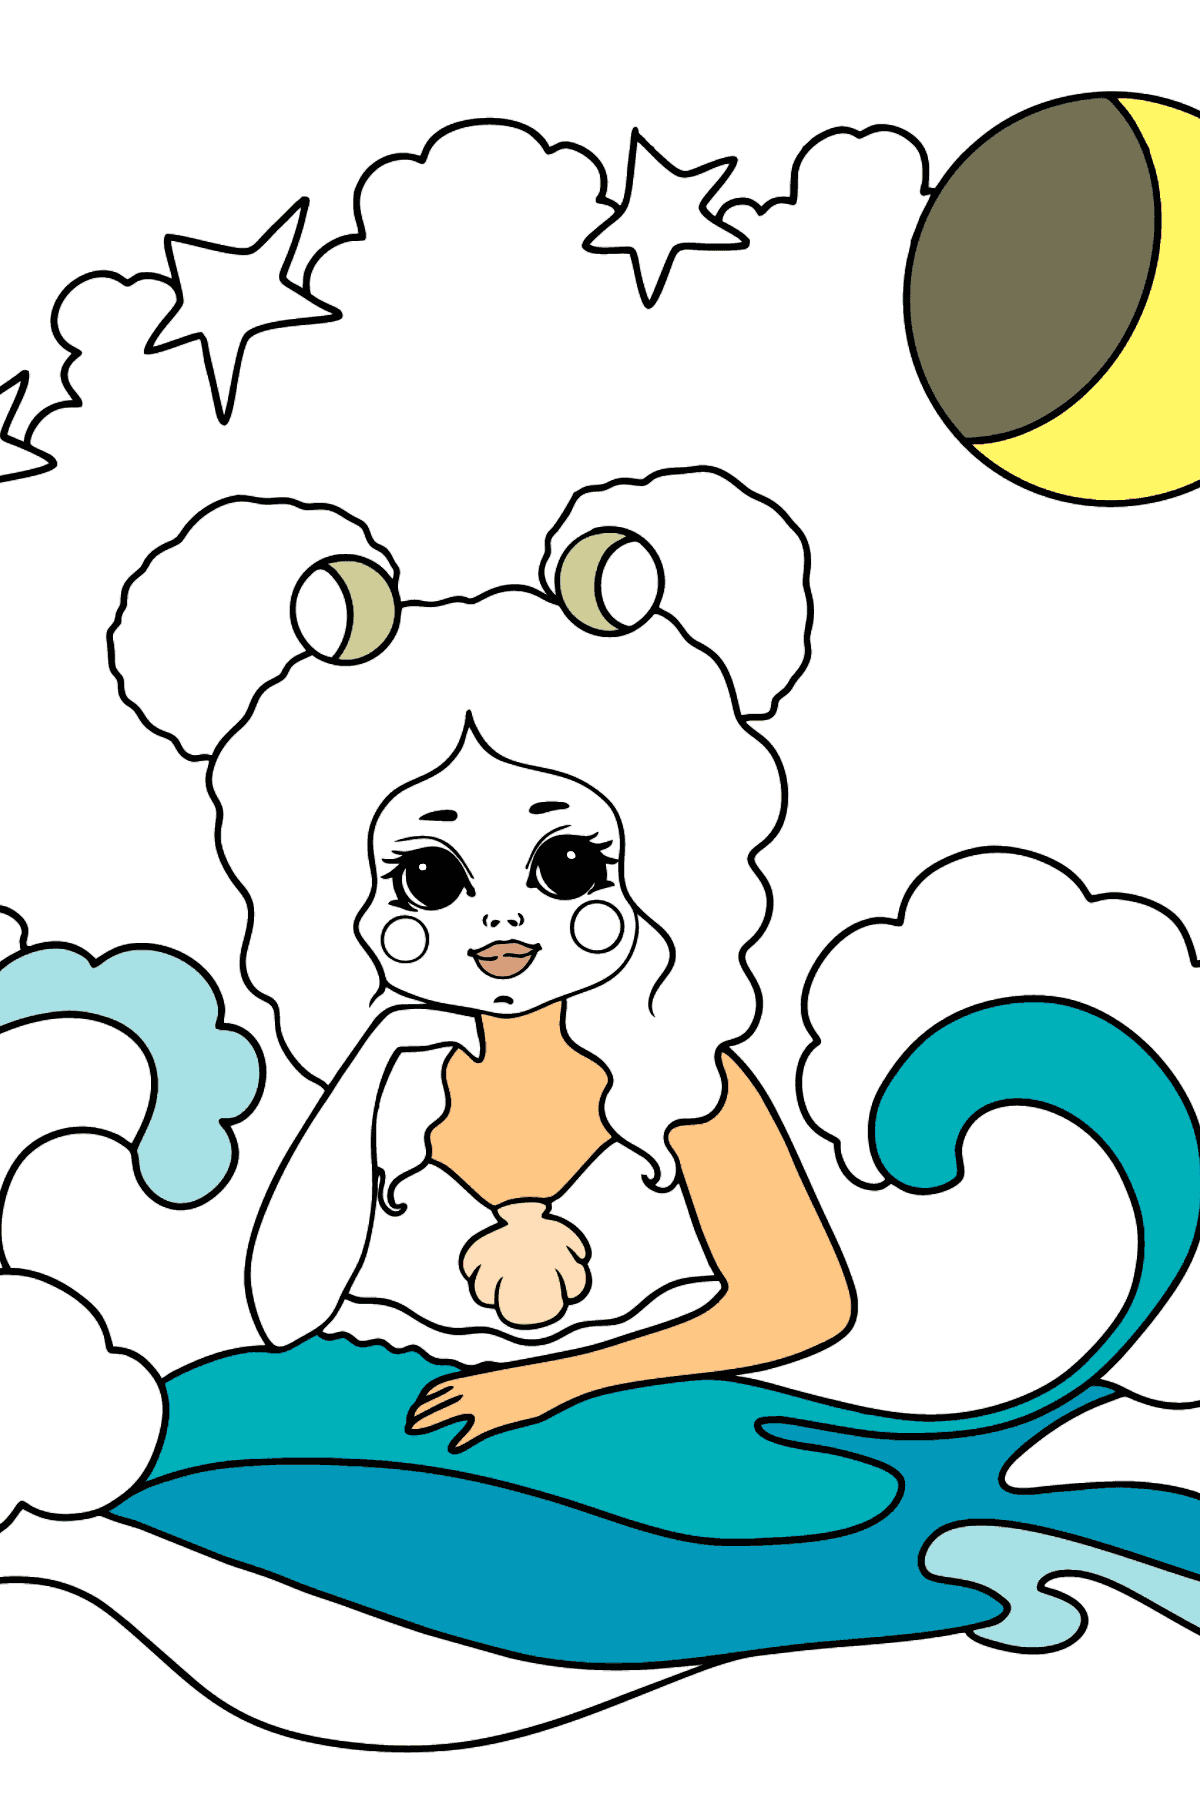 Mermaid and Moon coloring page - Coloring Pages for Kids